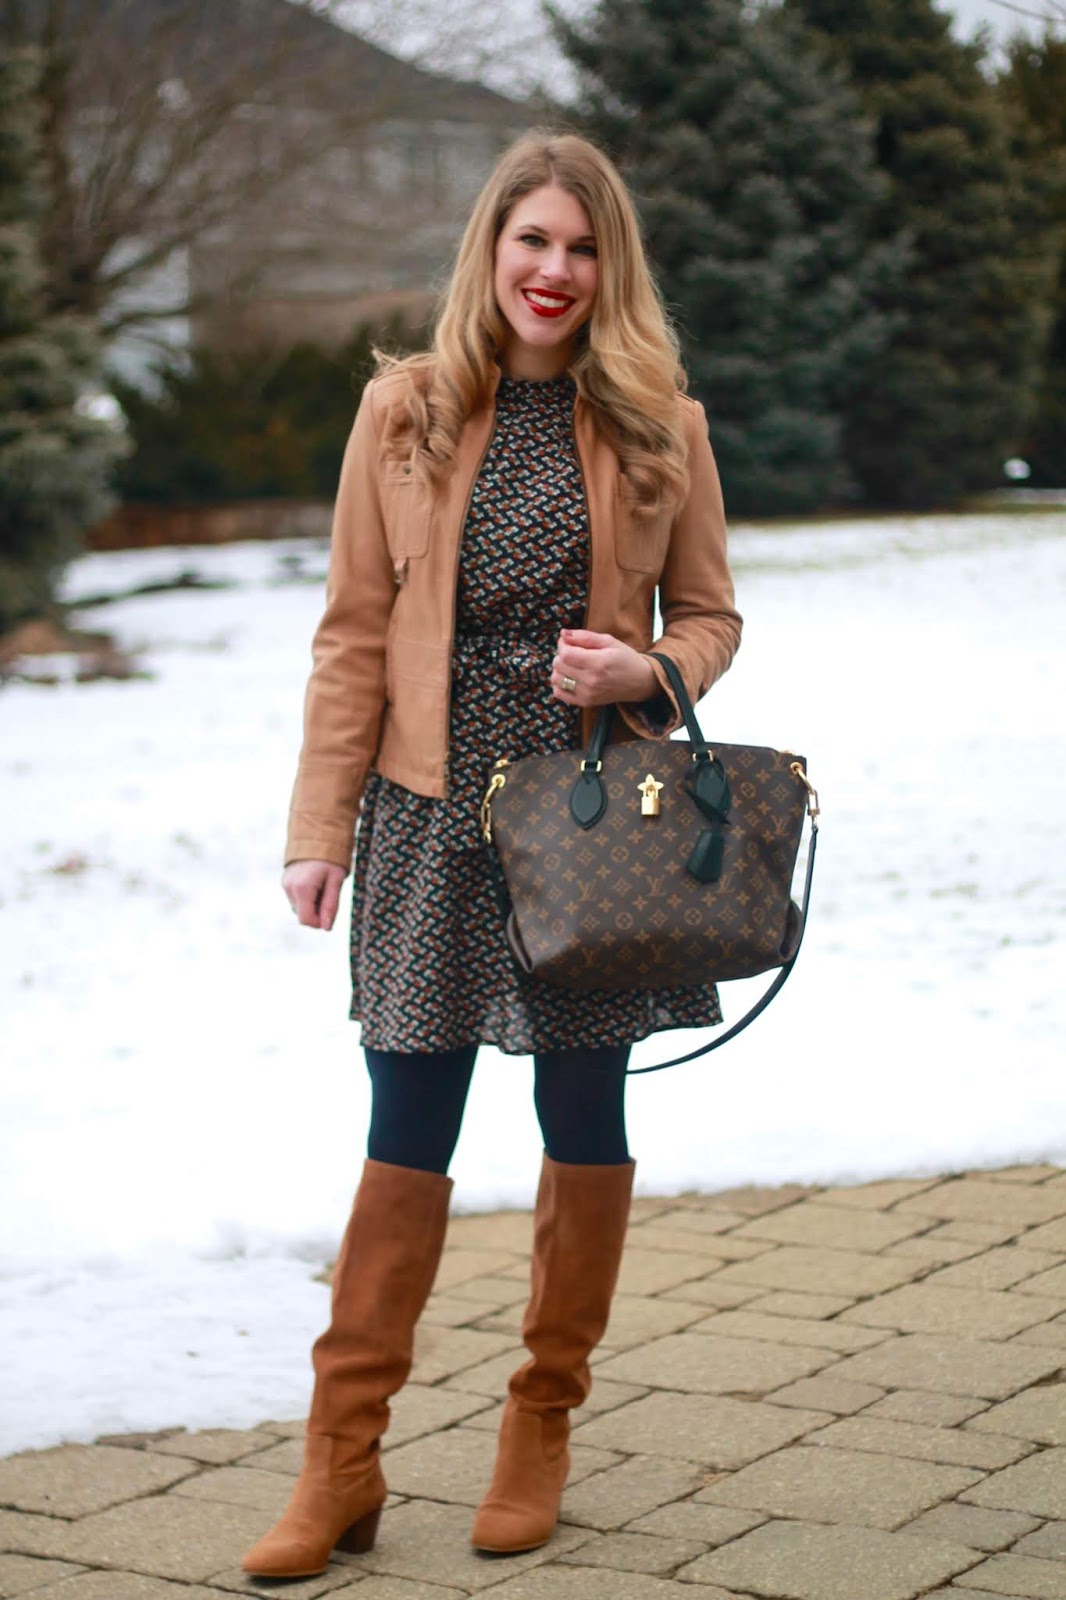 Floral Dress and Moto Jacket & Confident Twosday Linkup - I do deClaire